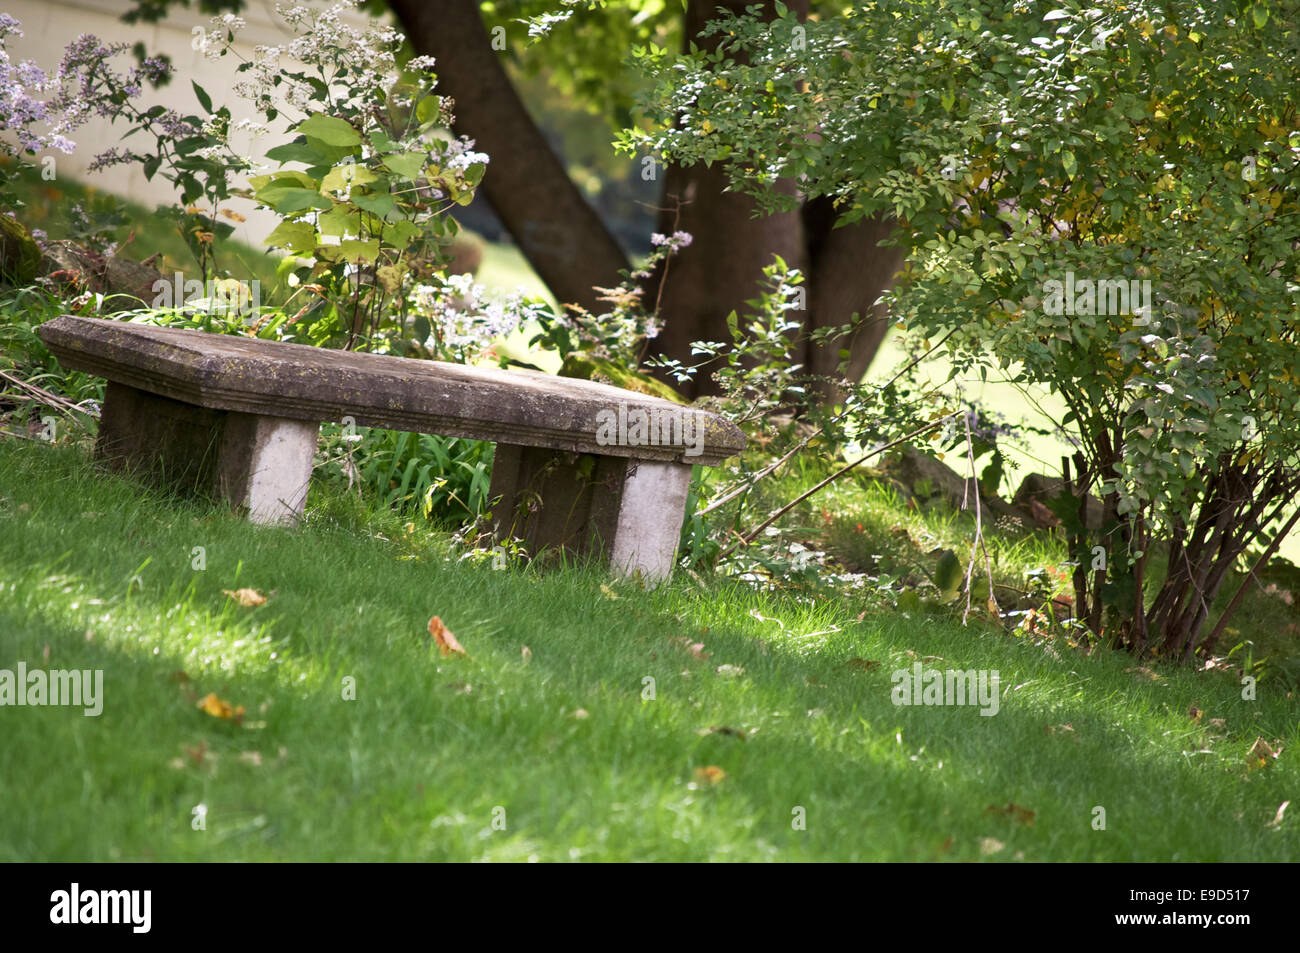 Solitary stone park bench hidden by trees in a green grass lawn. Stock Photo